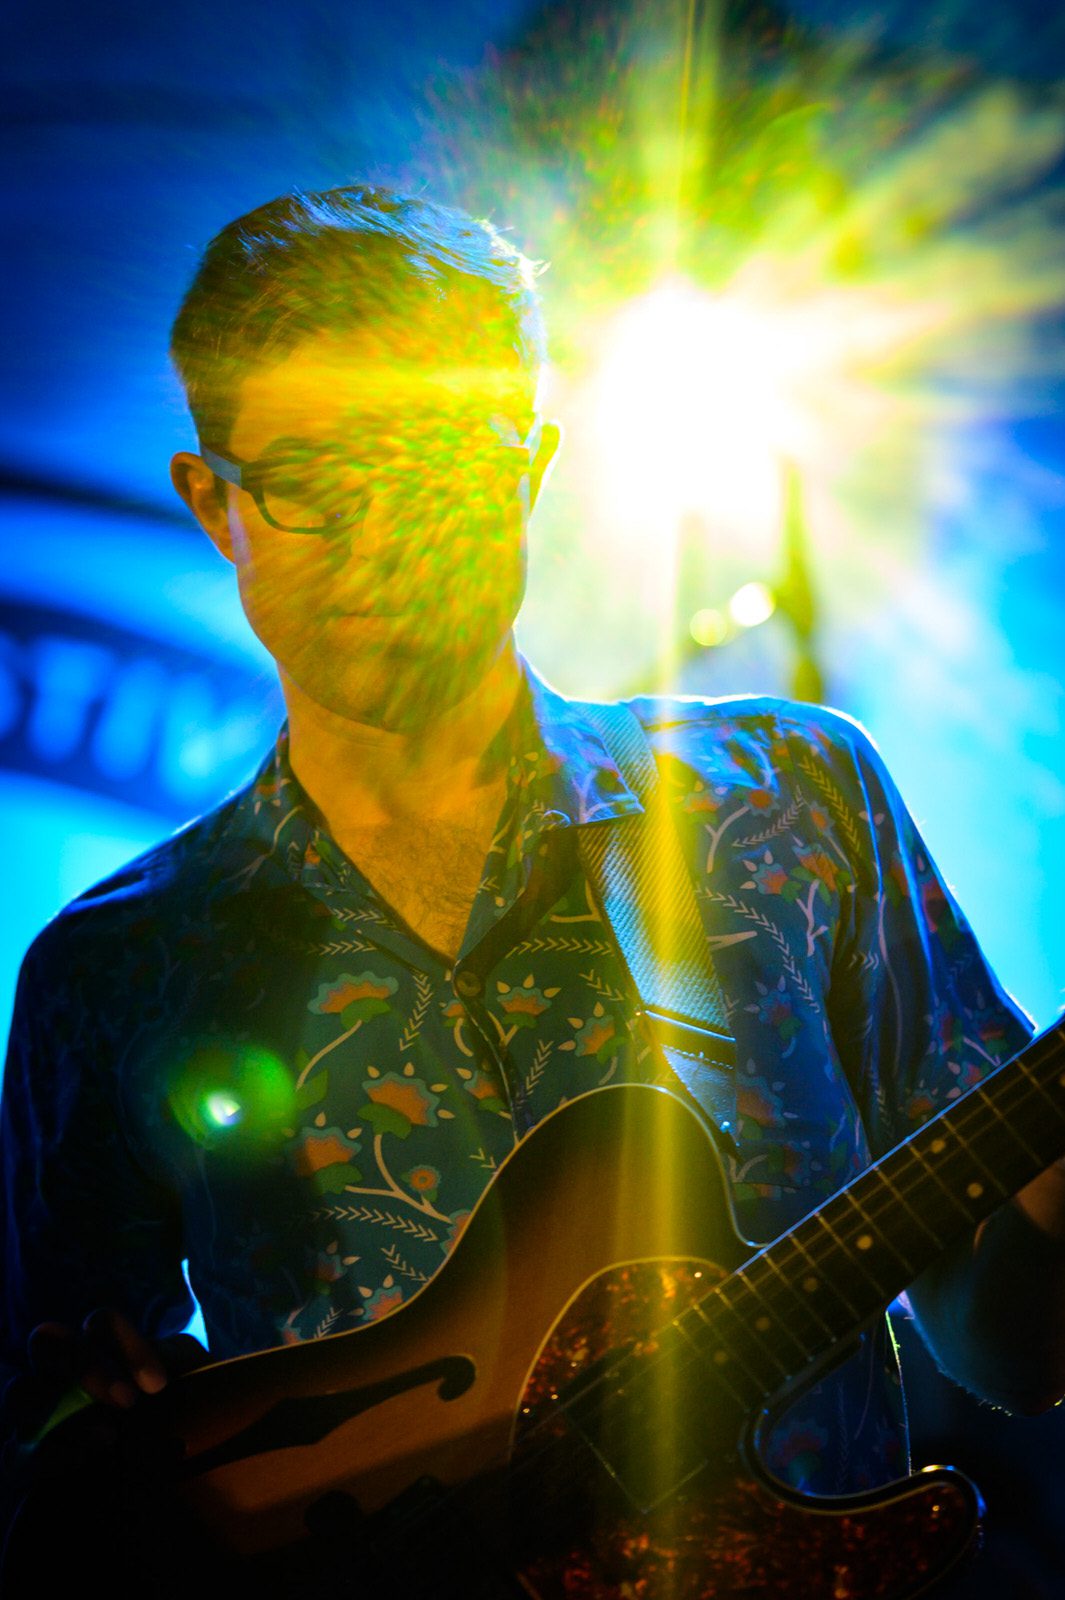 Guitarist Chris McQueen playing with Snarky Puppy on stage with bright lights